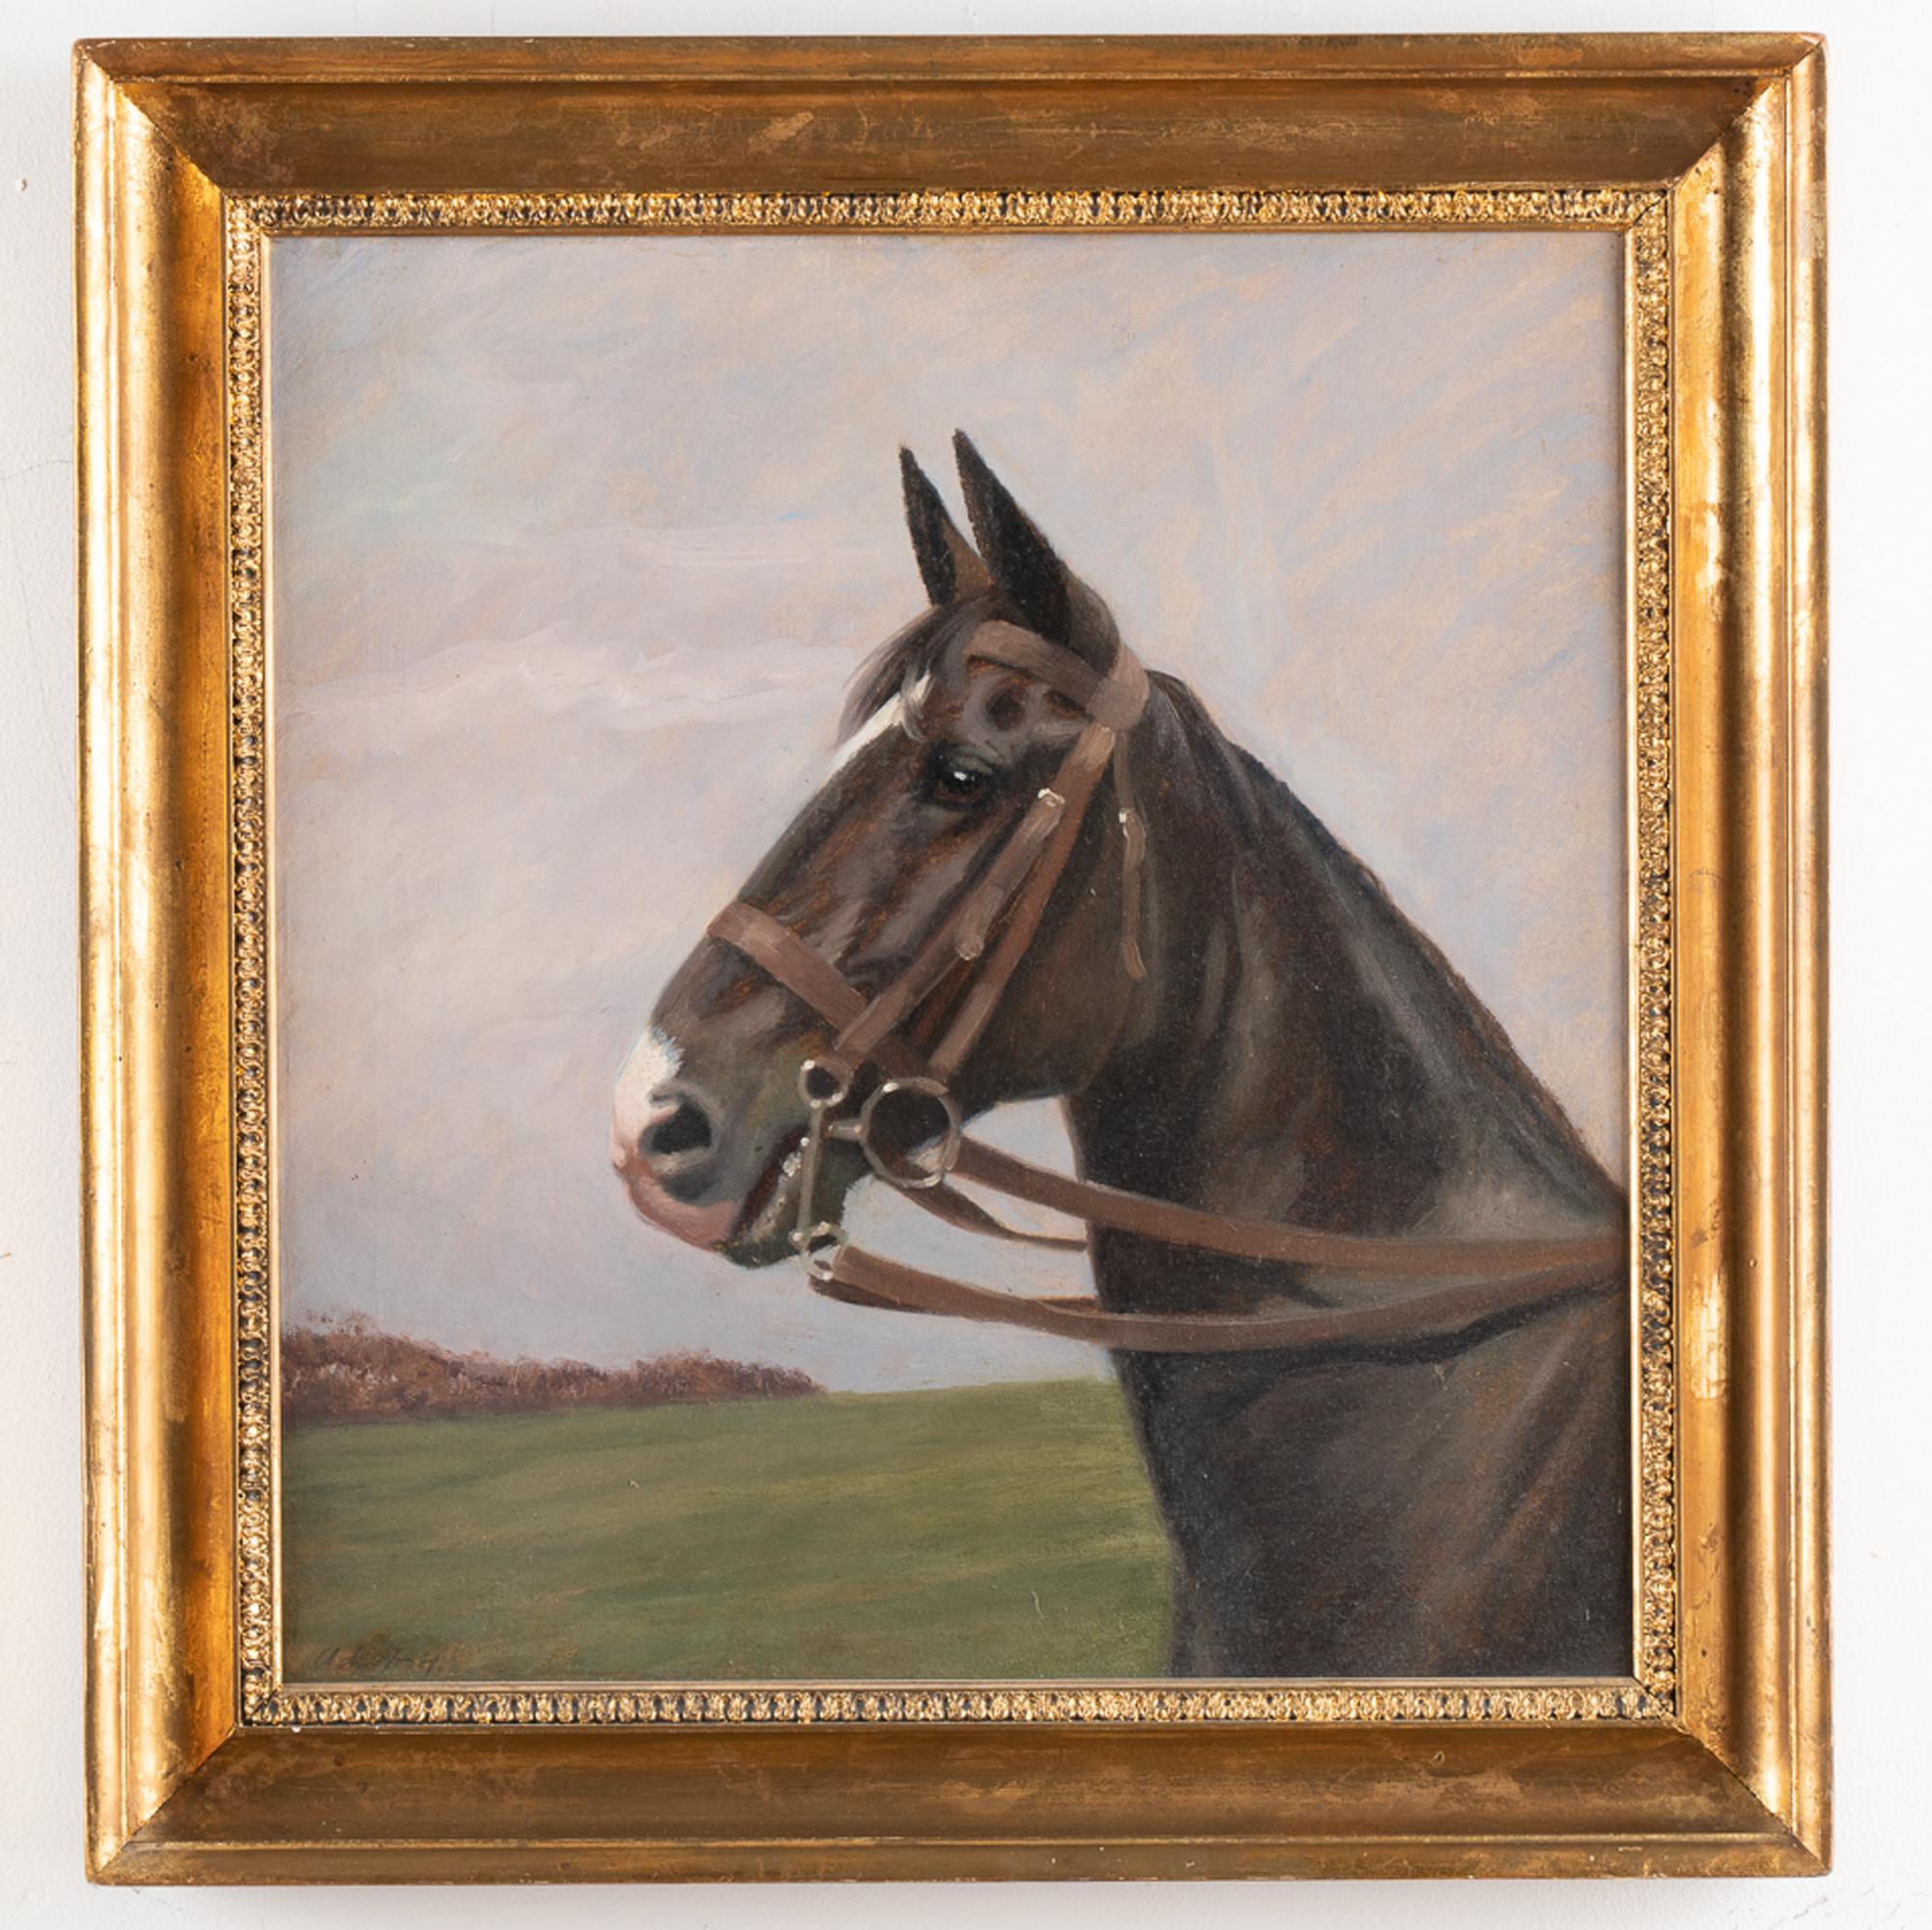 Original oil on canvas painting of black horse with a white blaze by Adolf Heinrich-Hansen.
Signed Ad. H.- H.
Condition: Minor crackles, a few minimal peelings. The canvas may benifit from tightening and light cleaning which we leave to the